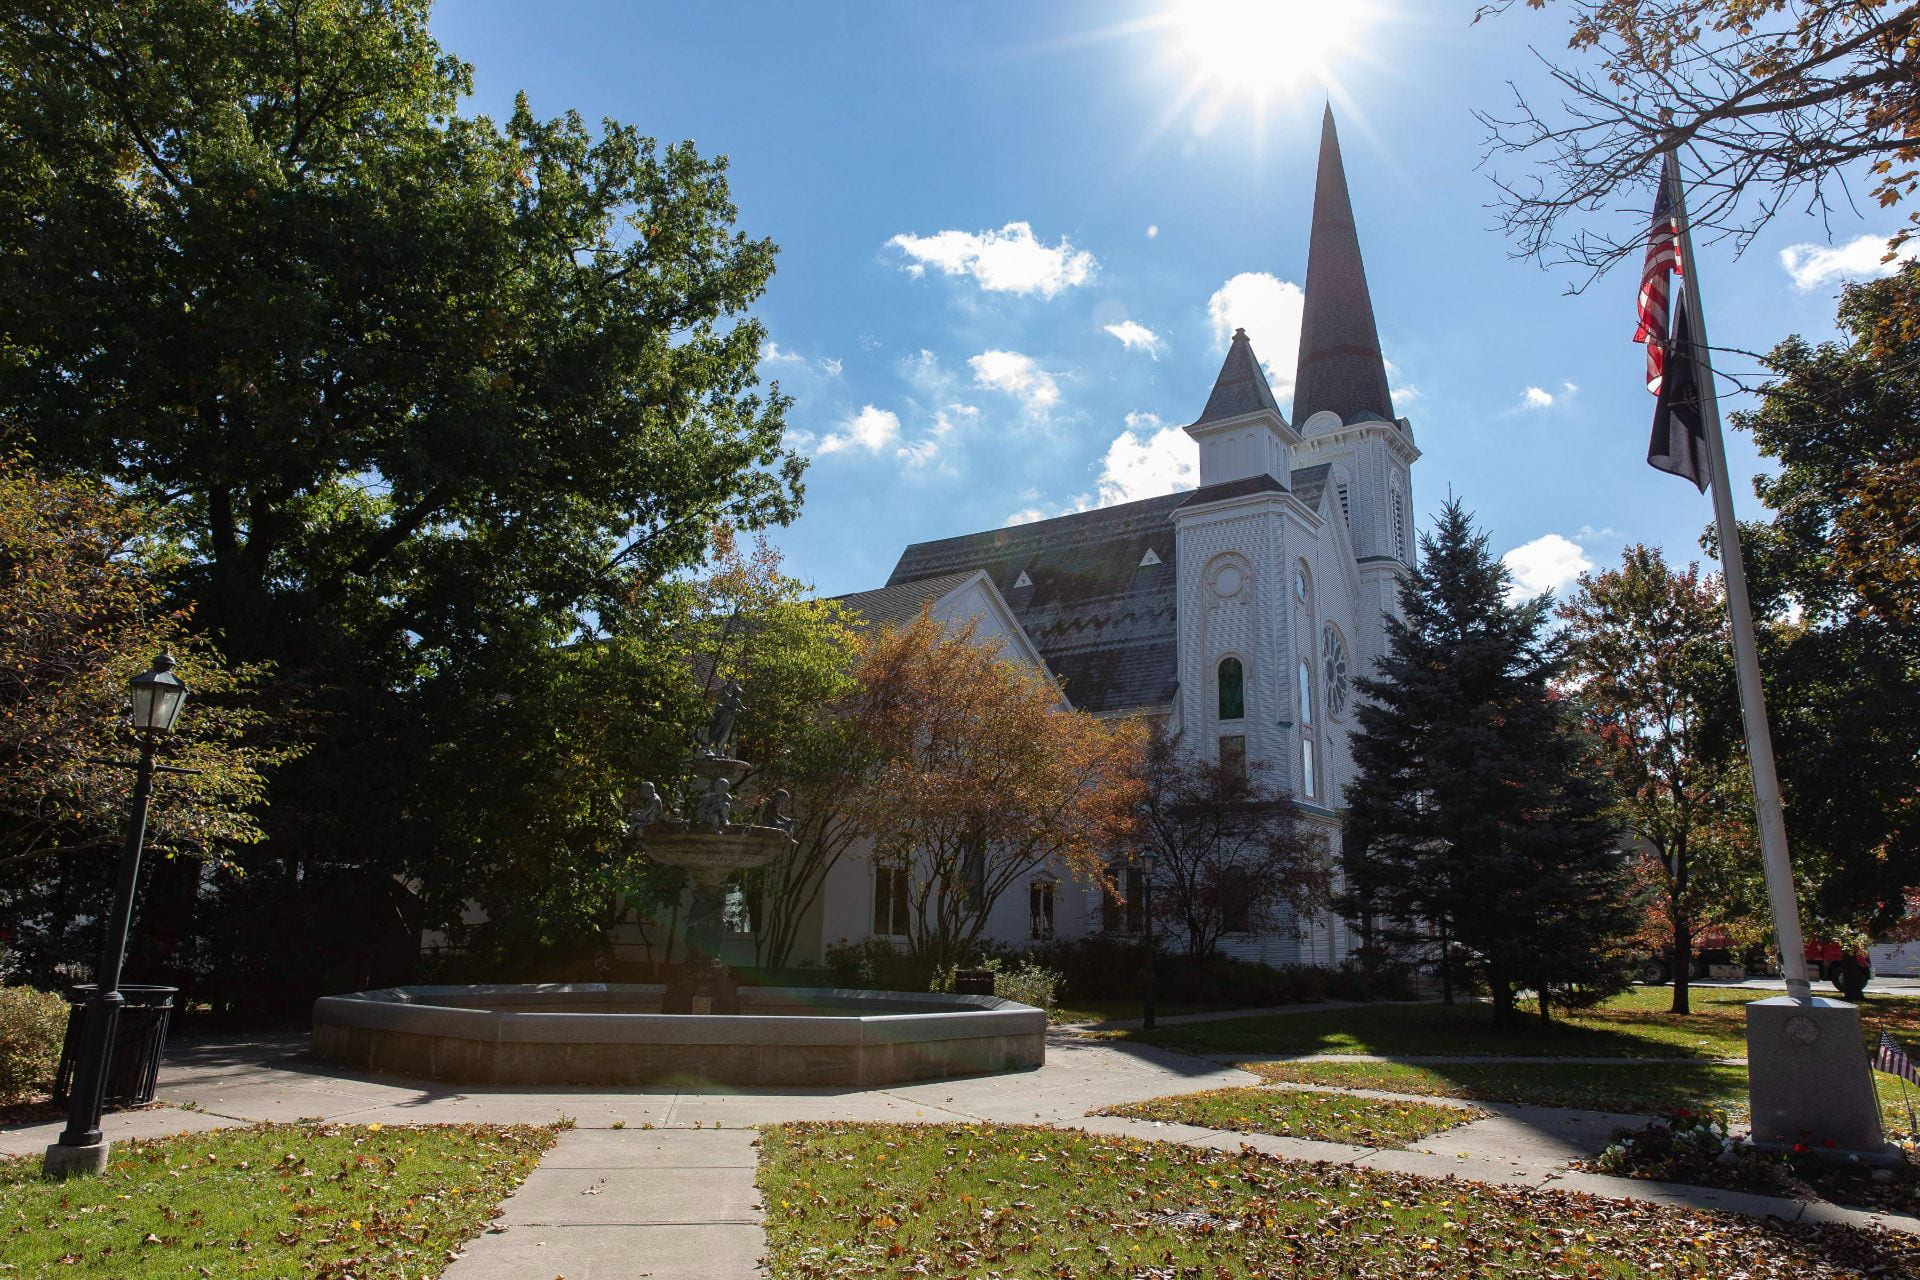 The United Methodist Church in Dryden, NY with its spire reaching upward toward the sun, also in the frame, on the right side of the photo. On the left, there is a tree, and a sidewalk that leads toward the photographer and foreground.